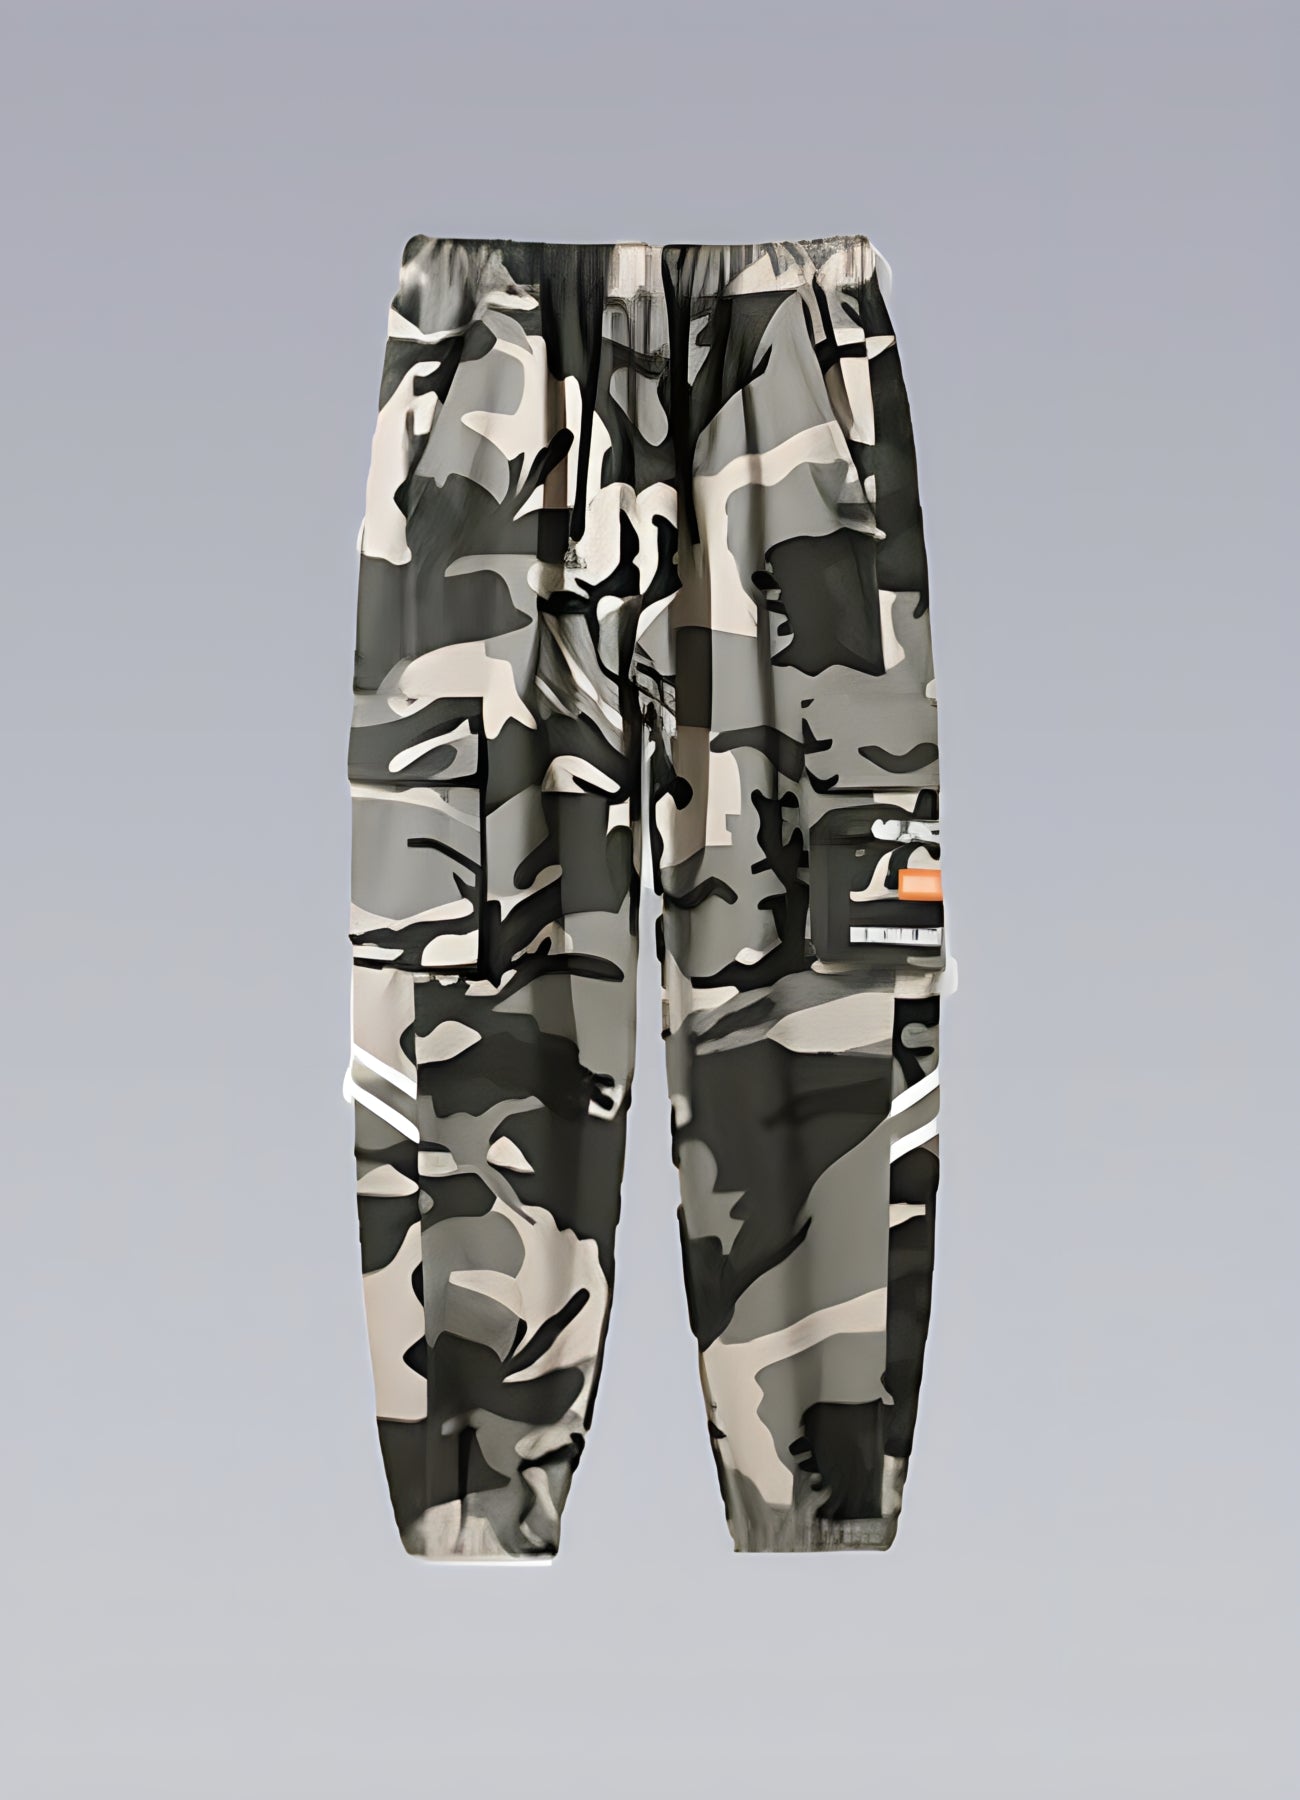 Promenade Cargo Pants in Camo and White – Thale Blanc